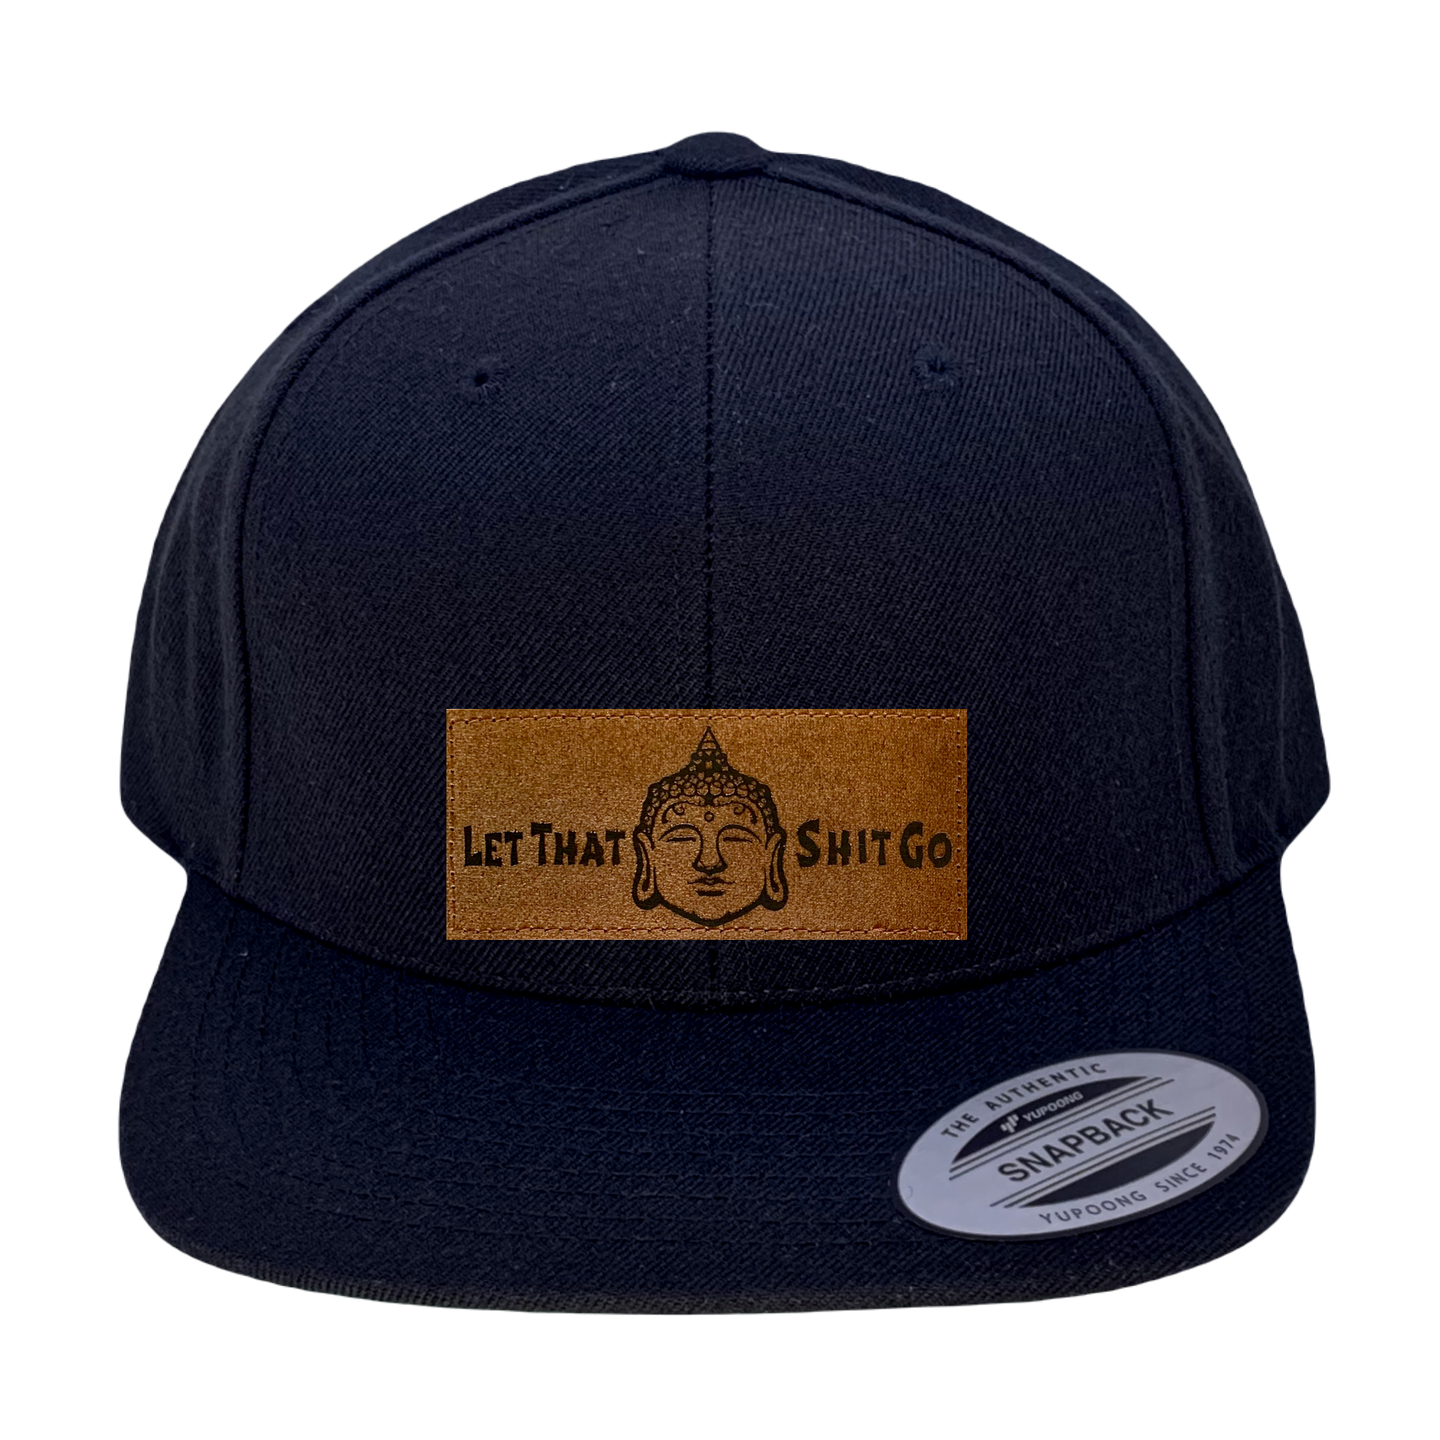 Yupoong 6089 Flat Bill, Hat / Visor with Green Under Bill and Handmade Vegan Leather Brown/white Buddha Patch by Buddha Gear.